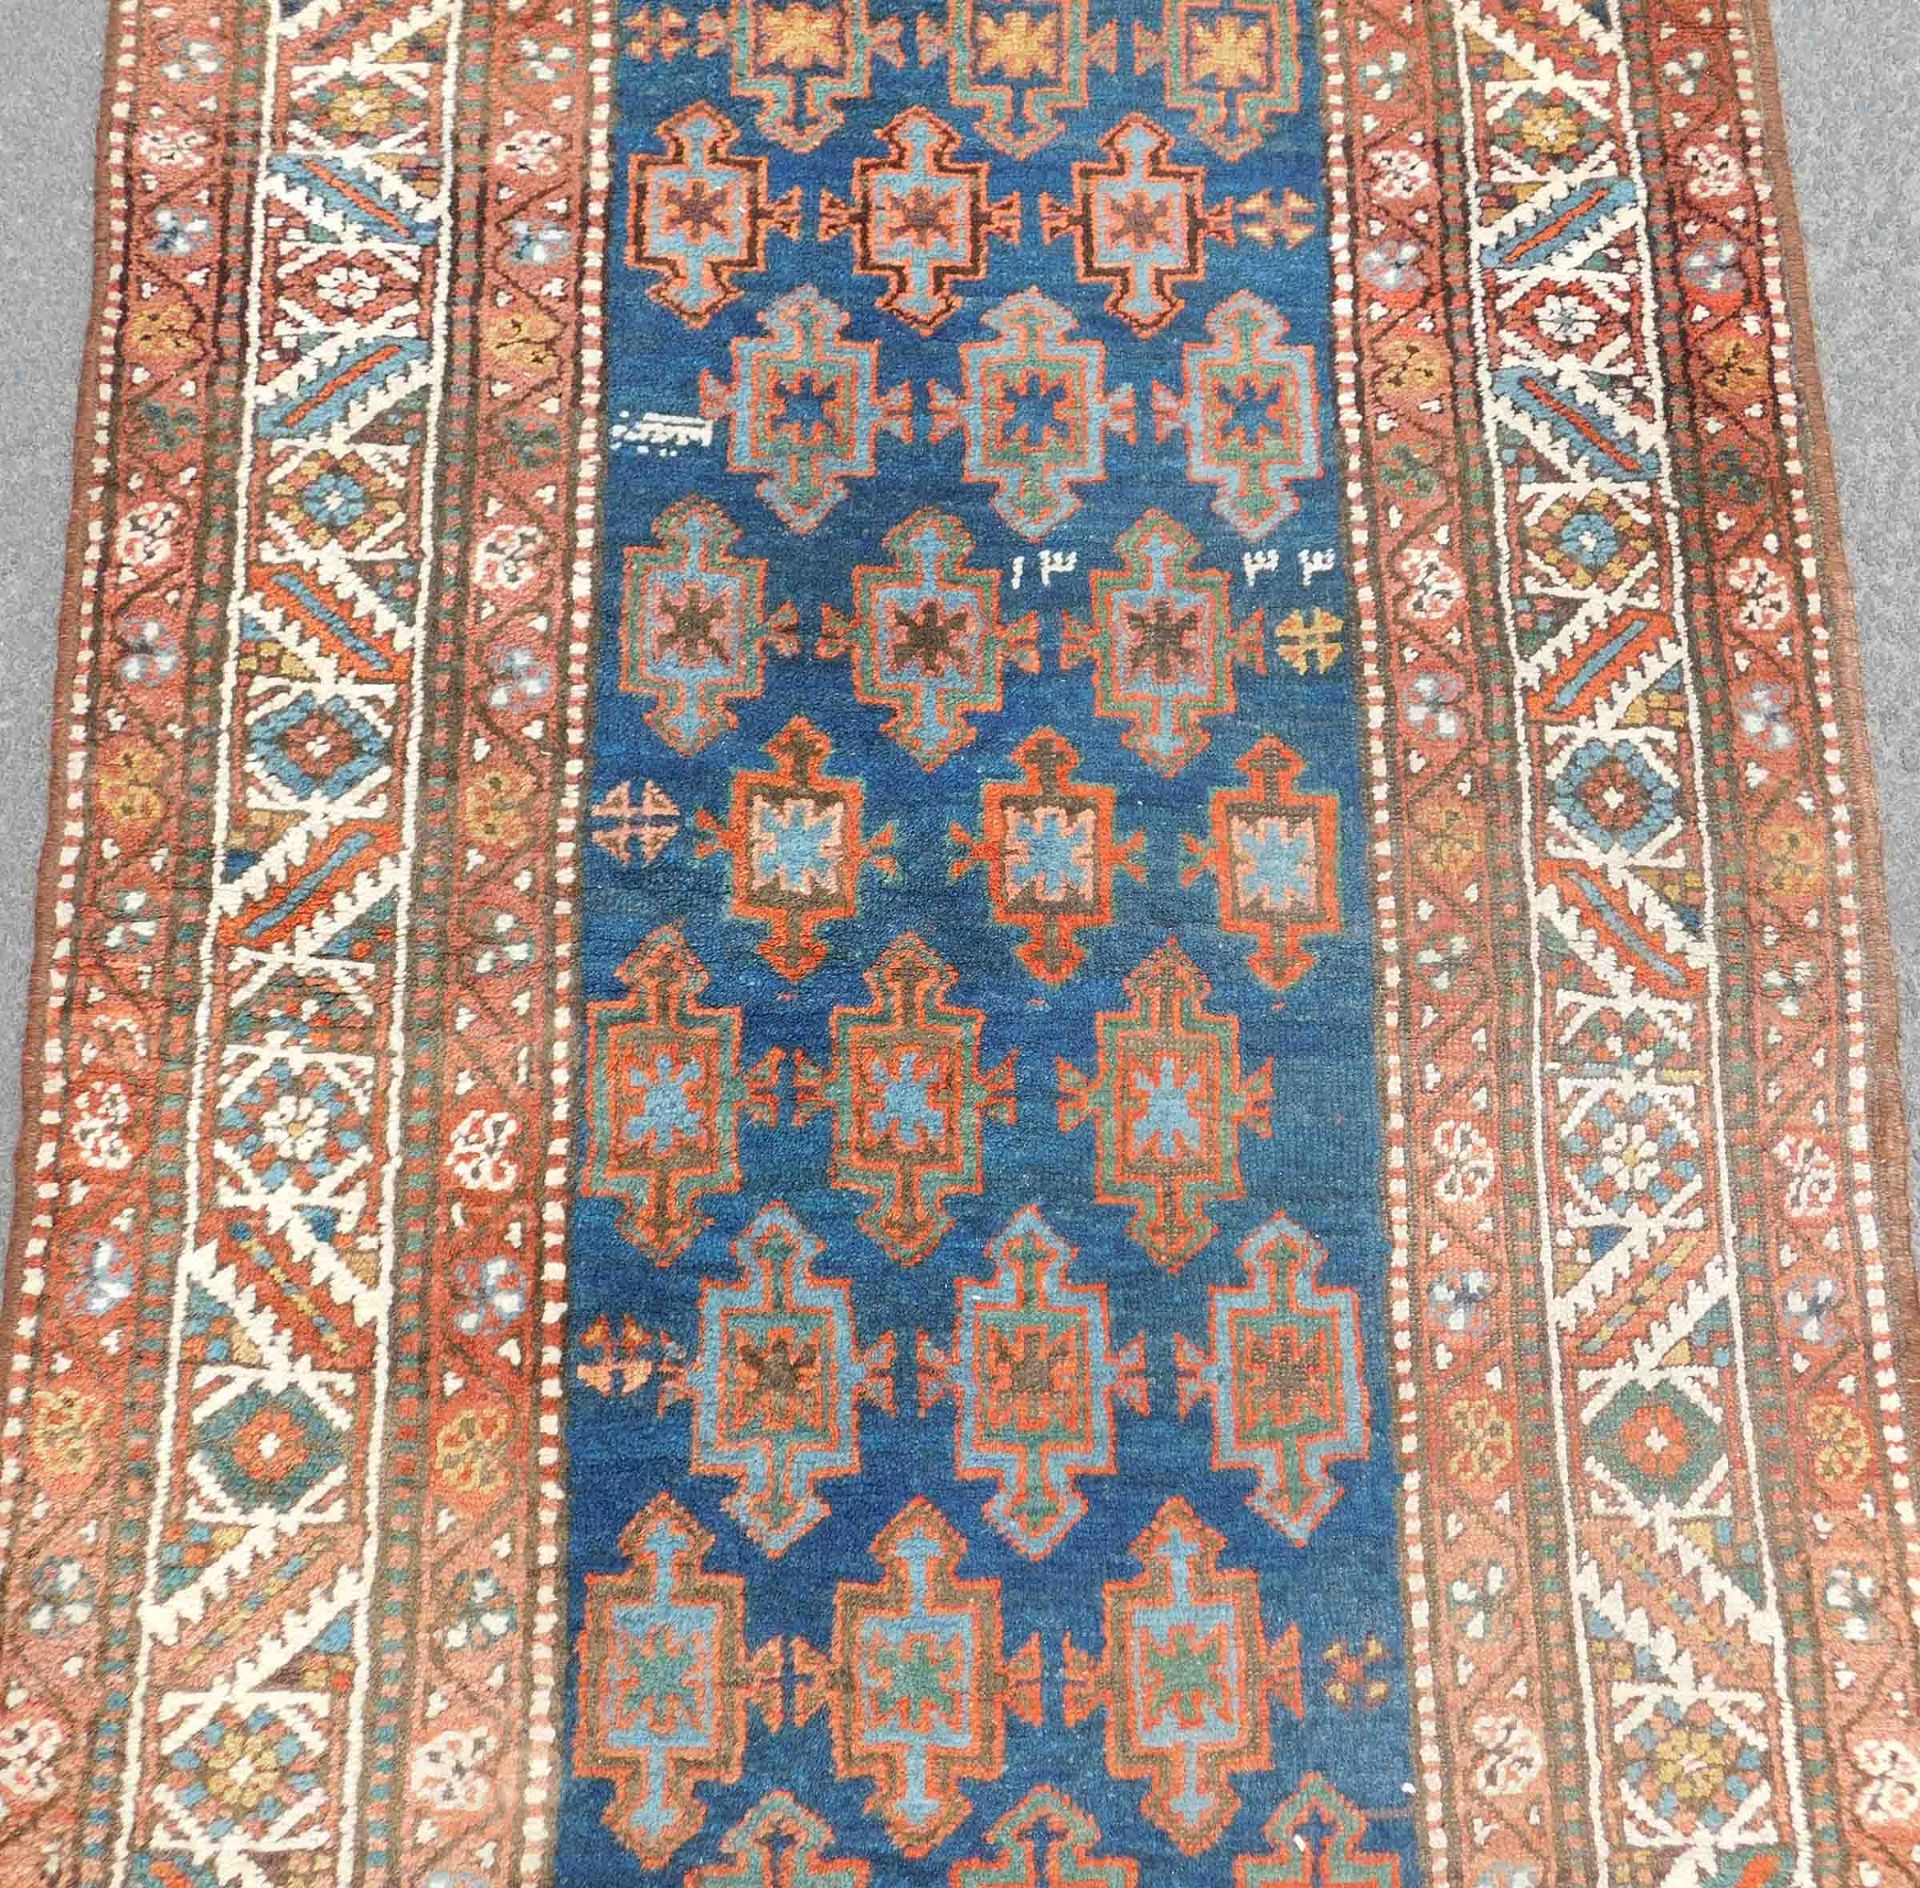 Heriz Persian rug. Runner. Iran. Antique, around 1912-1913.Knotted by hand. Wool on wool. Probably - Image 4 of 8